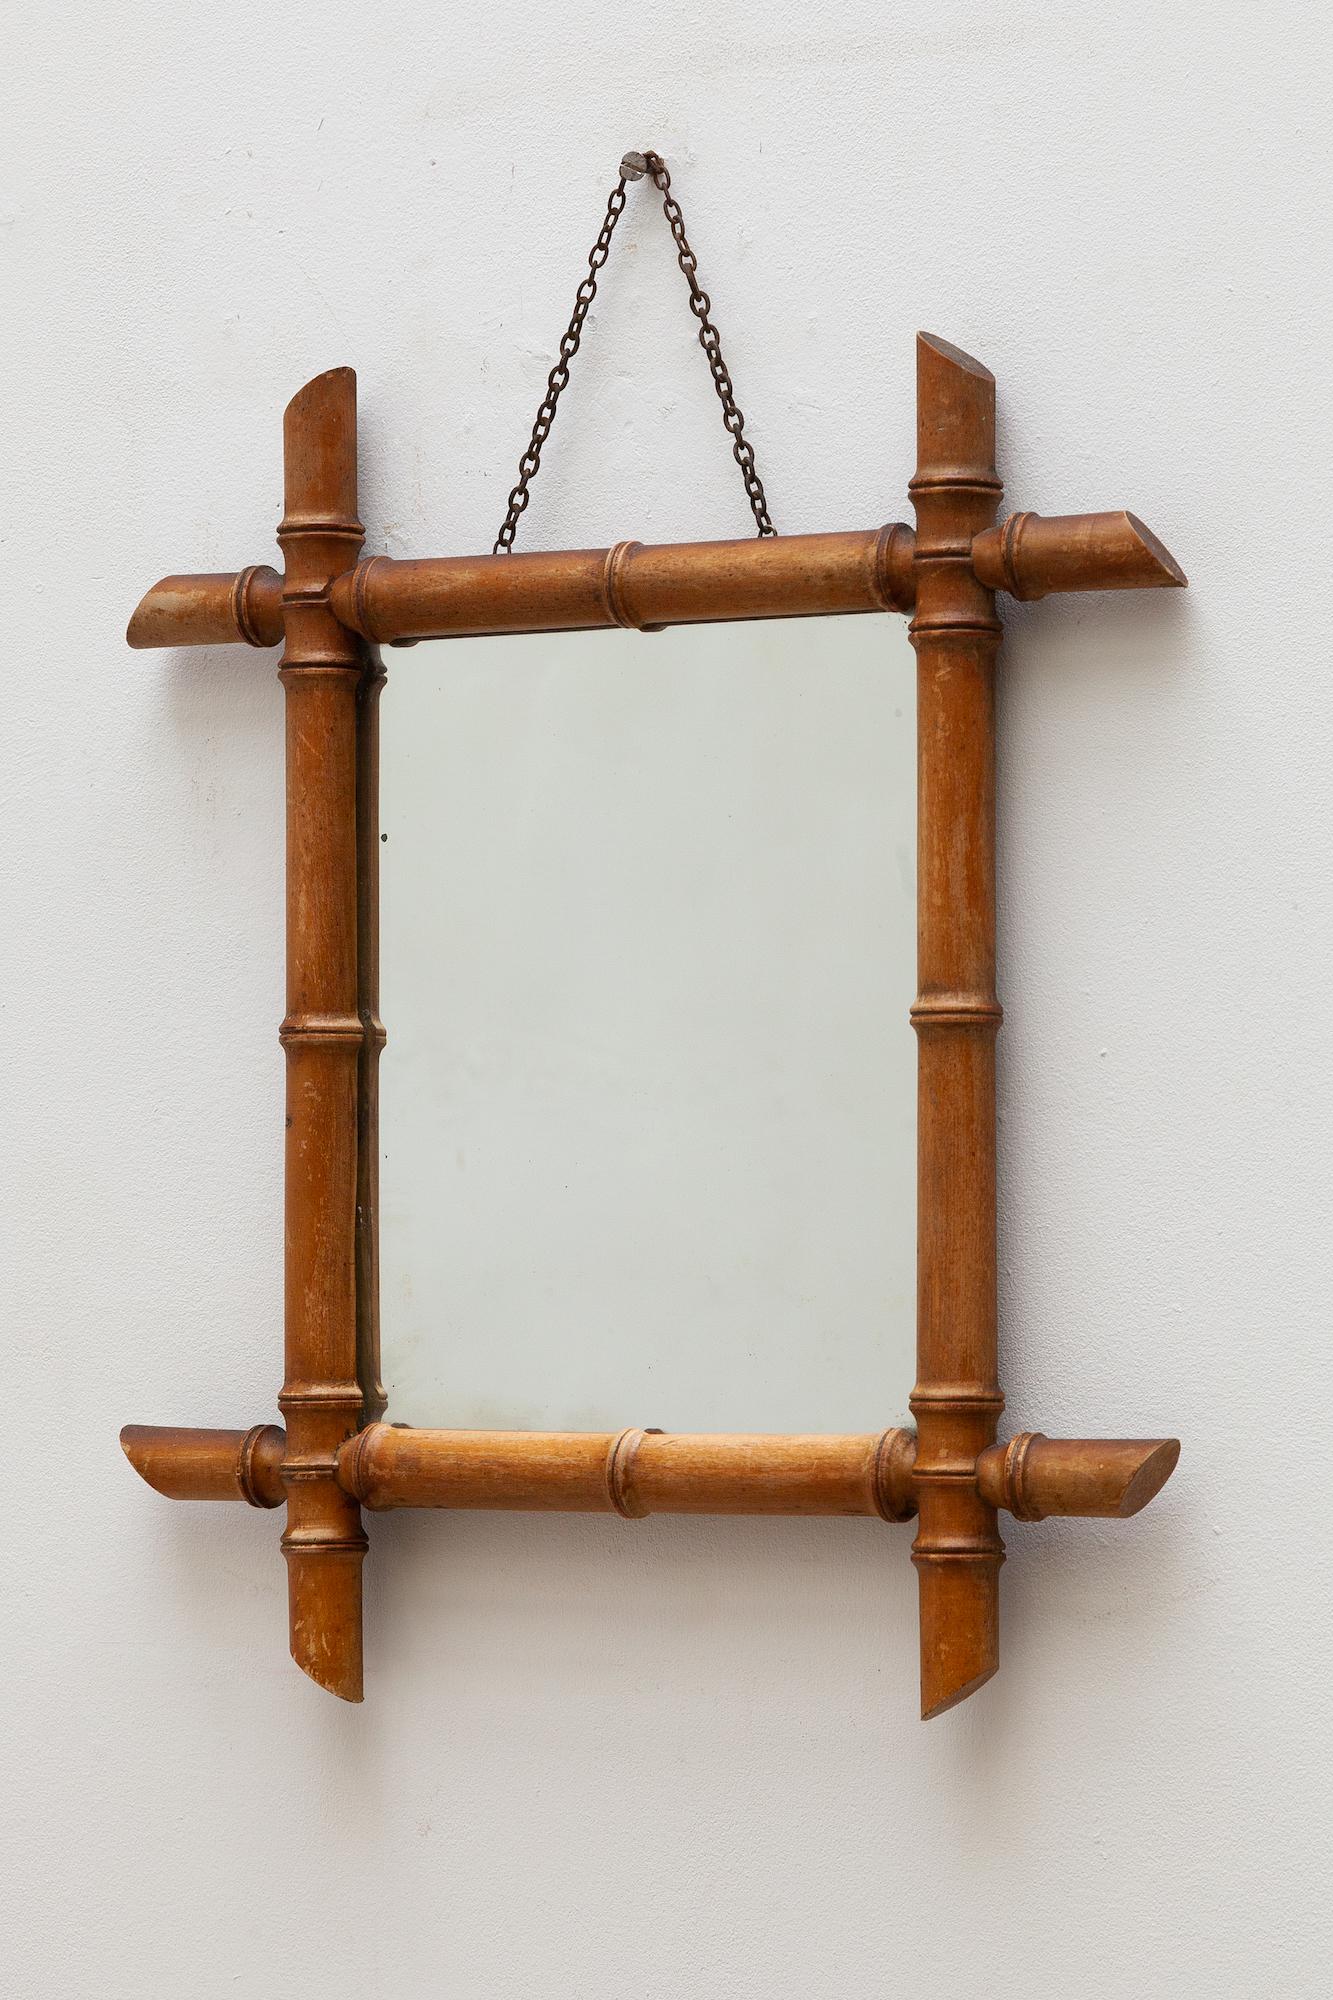 Antique bamboo wall mirror made cut from fruitwood manufactured in Cirey sur Vezouse, France. Labeled. Hangs from a small chain. The original label still attached. Dimensions: 42 W x 47 H x 4 D cm.